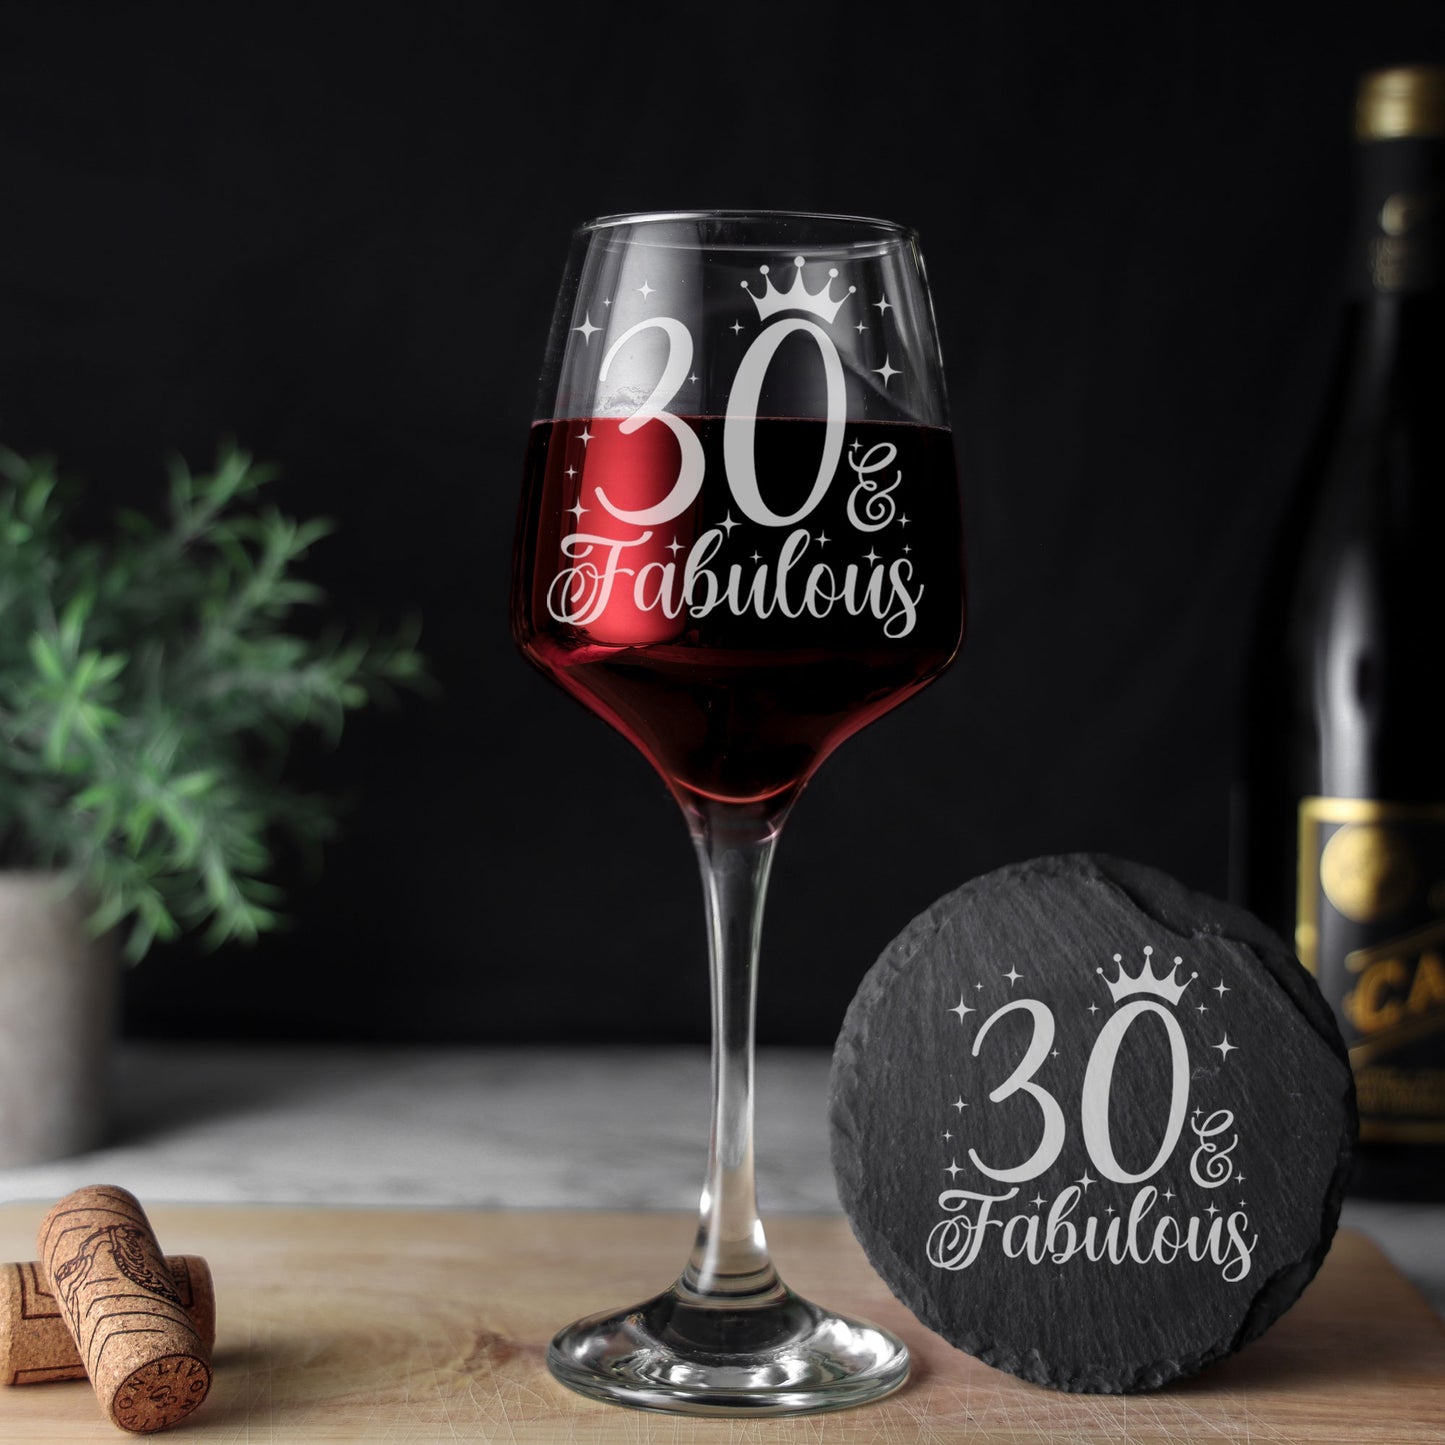 30 & Fabulous 30th Birthday Gift Engraved Wine Glass and/or Coaster Set  - Always Looking Good - Glass & Round Coaster  